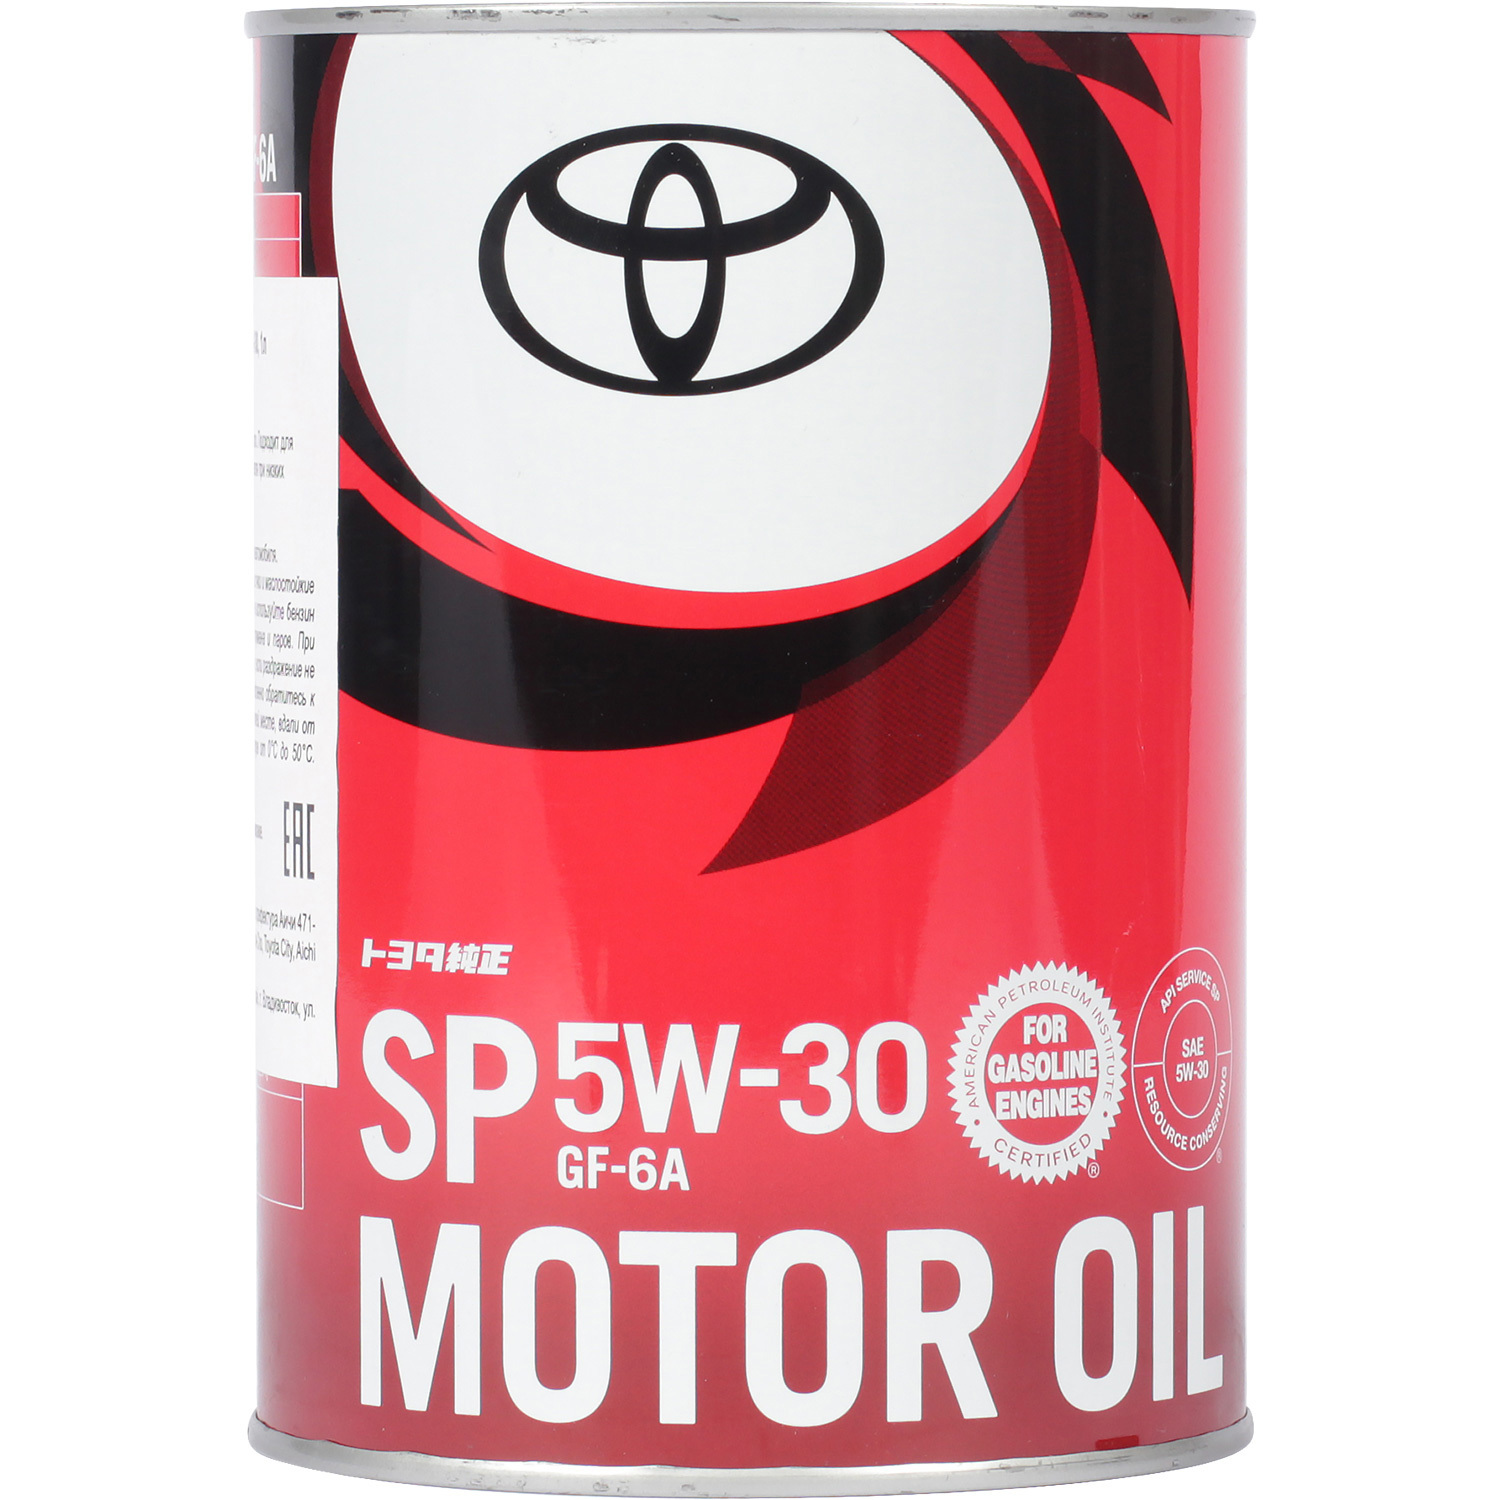 Toyota Моторное масло Toyota Motor Oil 5W-30, 1 л моторное масло amsoil xl extended life synthetic motor oil 10w 30 3 784 л